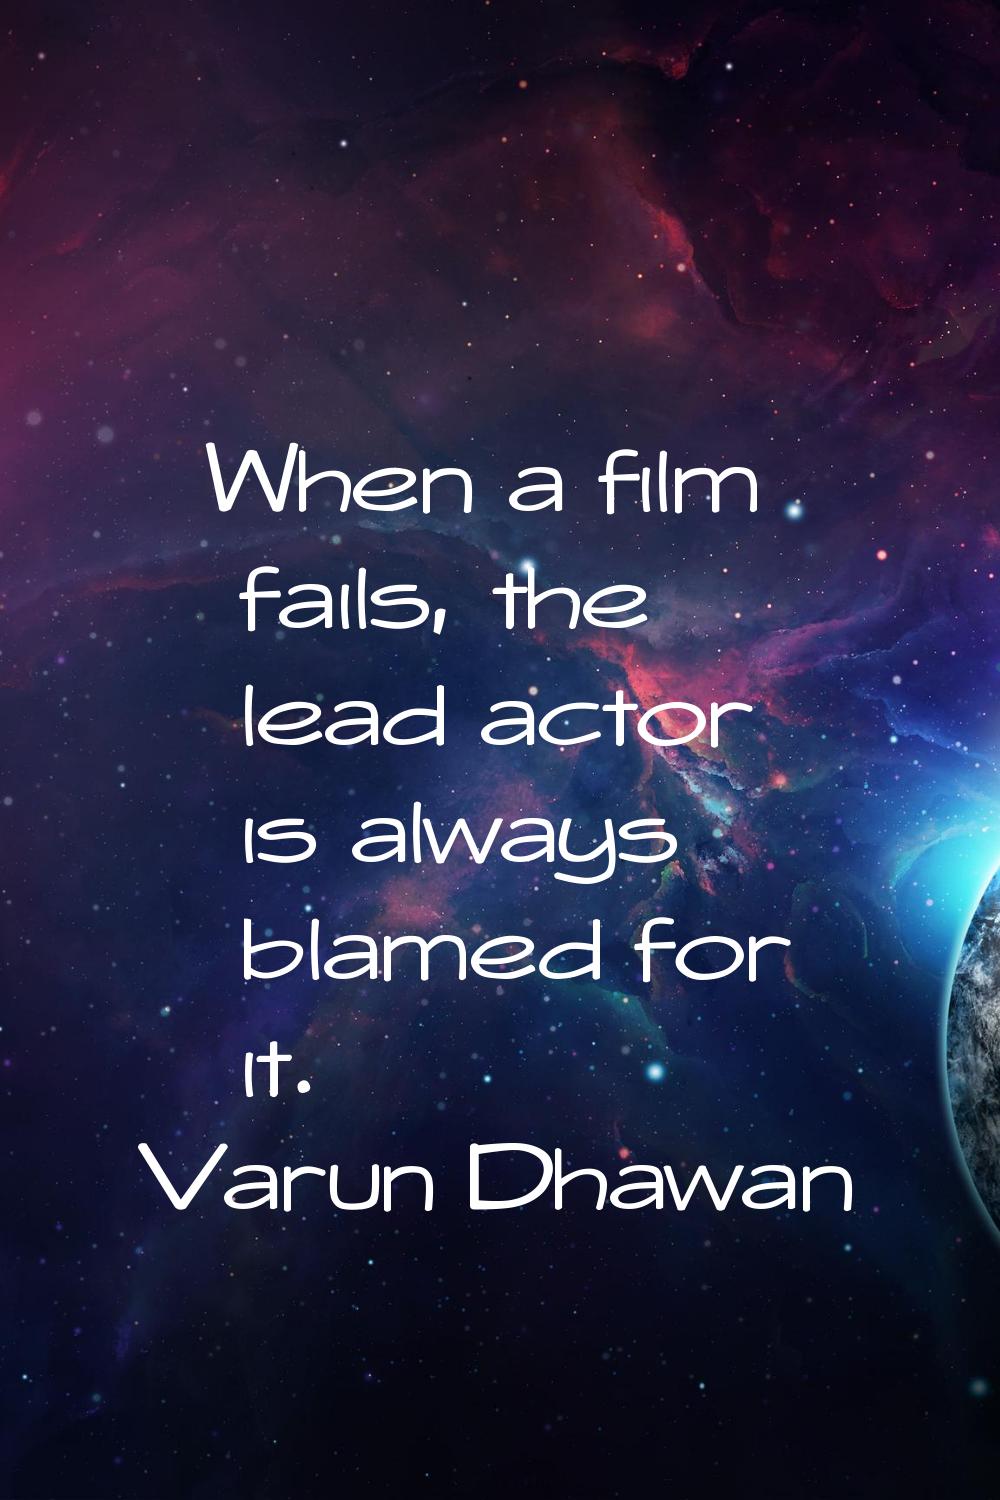 When a film fails, the lead actor is always blamed for it.